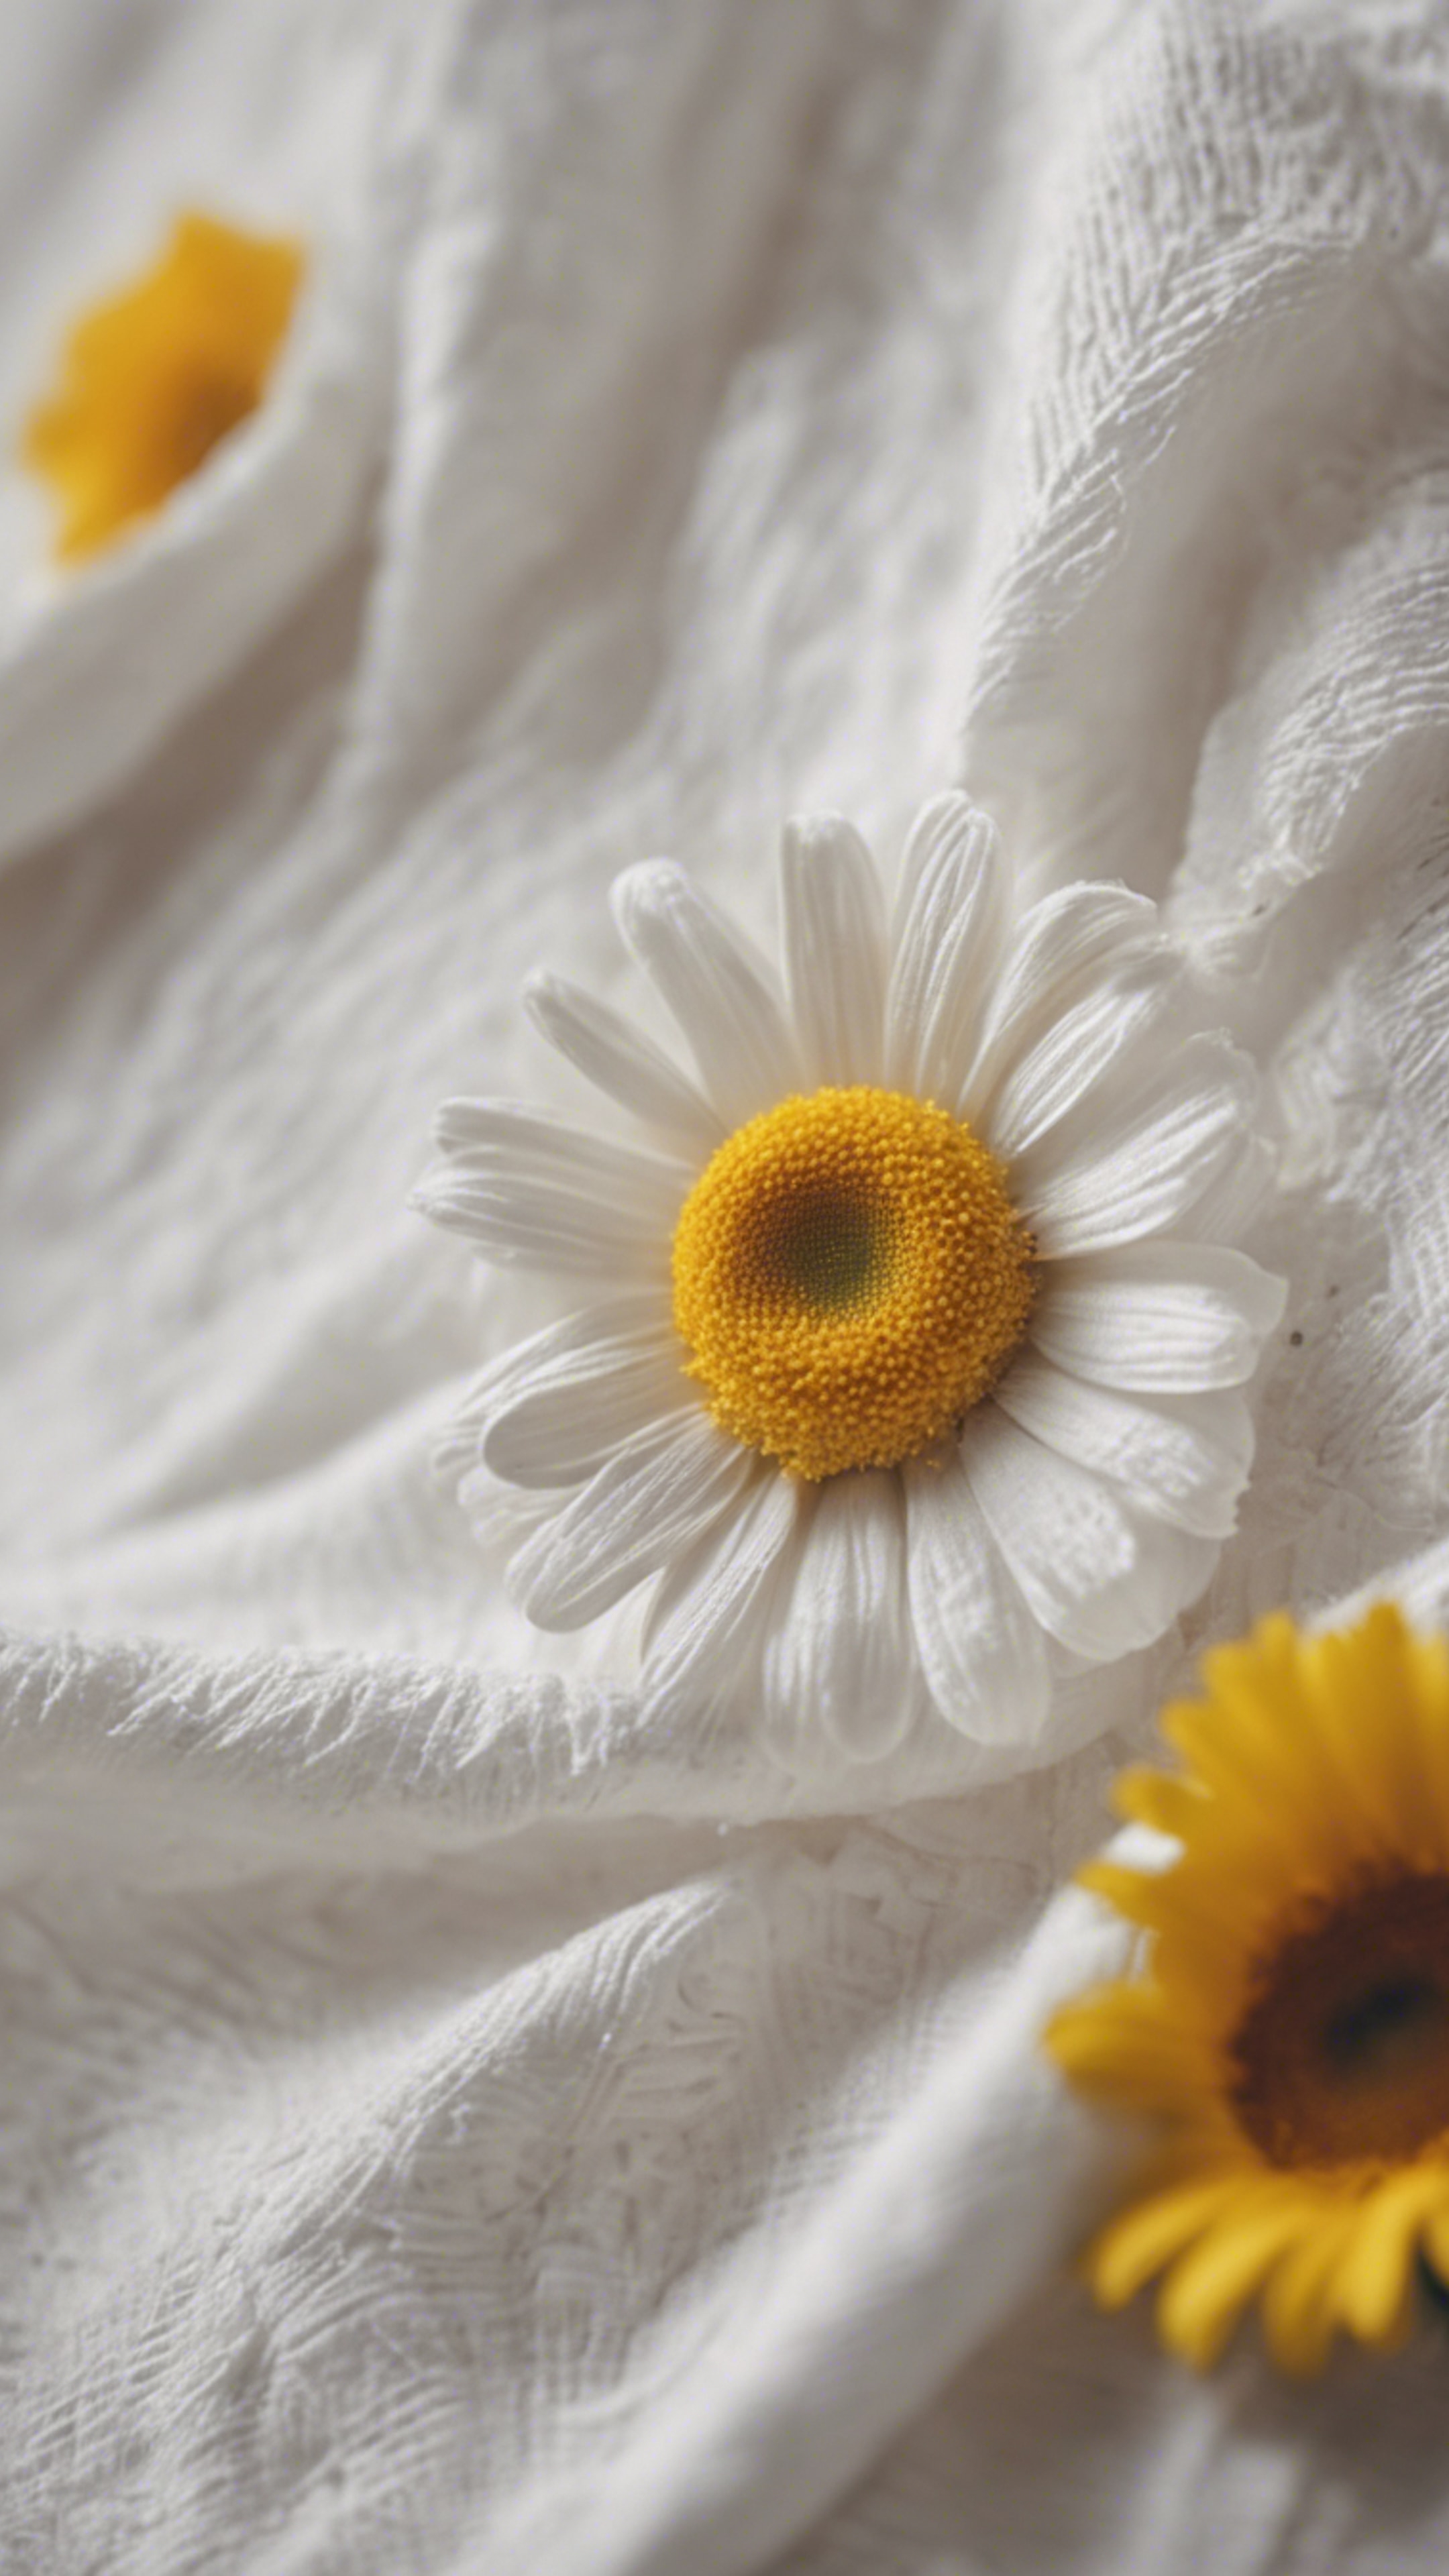 A white cotton dress with a daisy, featuring yellow petals and a white center. Валлпапер[81c17e18773146008e6c]